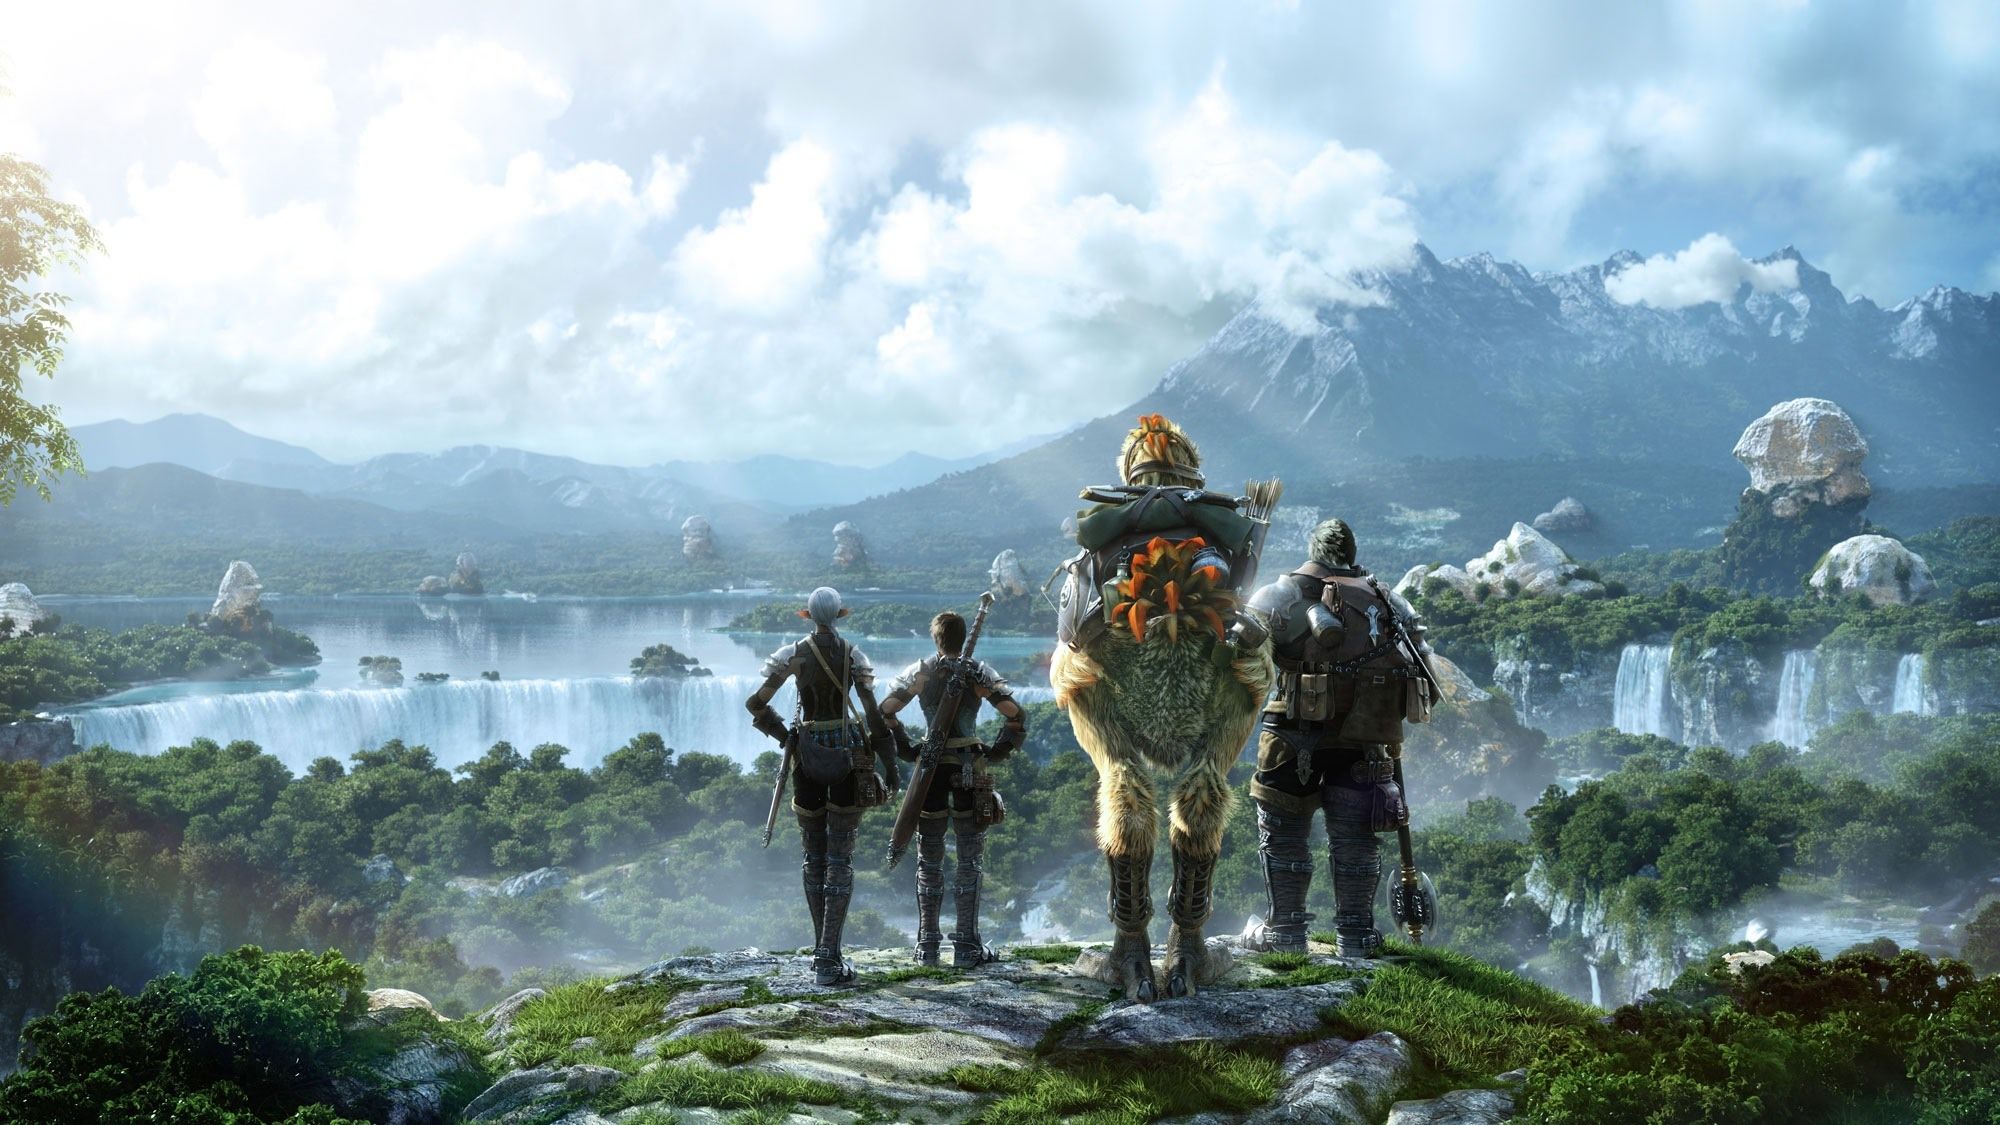 Square Enix Now Offering Two-Week Final Fantasy XIV Trial | NooBabble